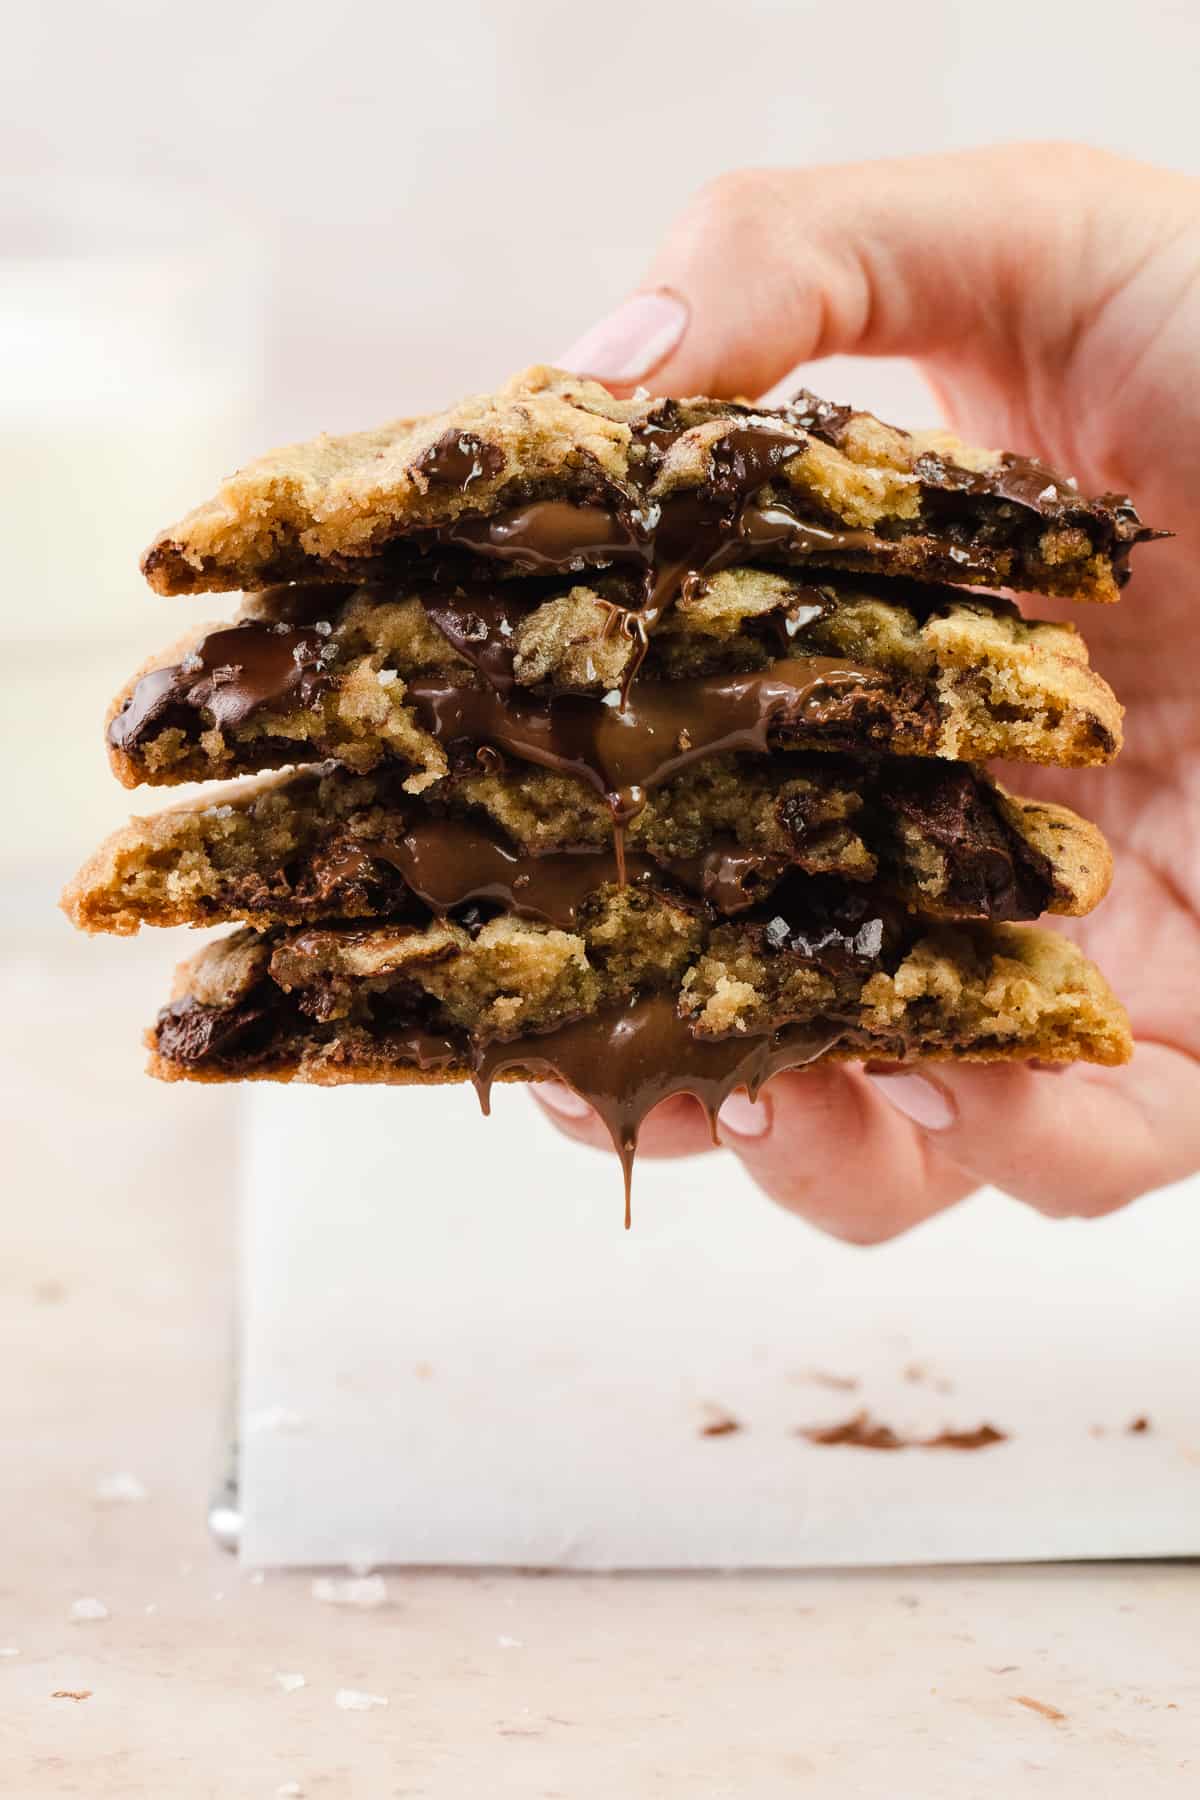 A hand holding a cross section of 4 Nutella Chocolate Chip Cookies with glass of milk in the back